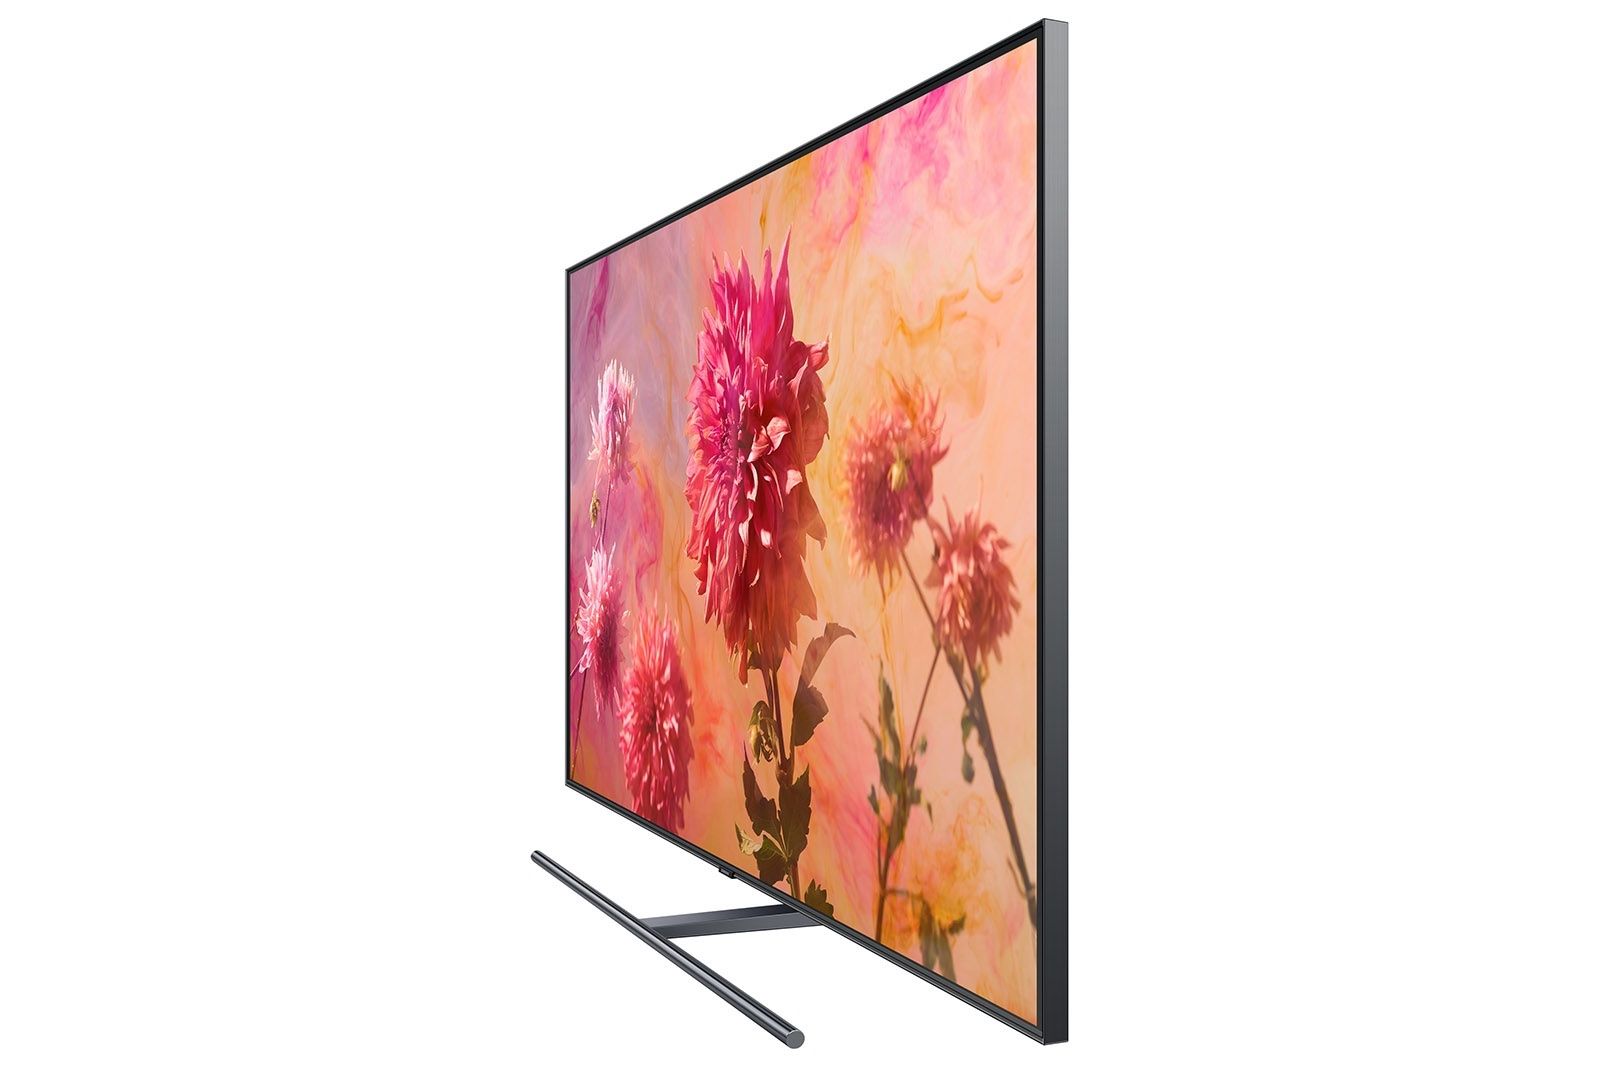 Samsung Q9FN QLED TV review image 5